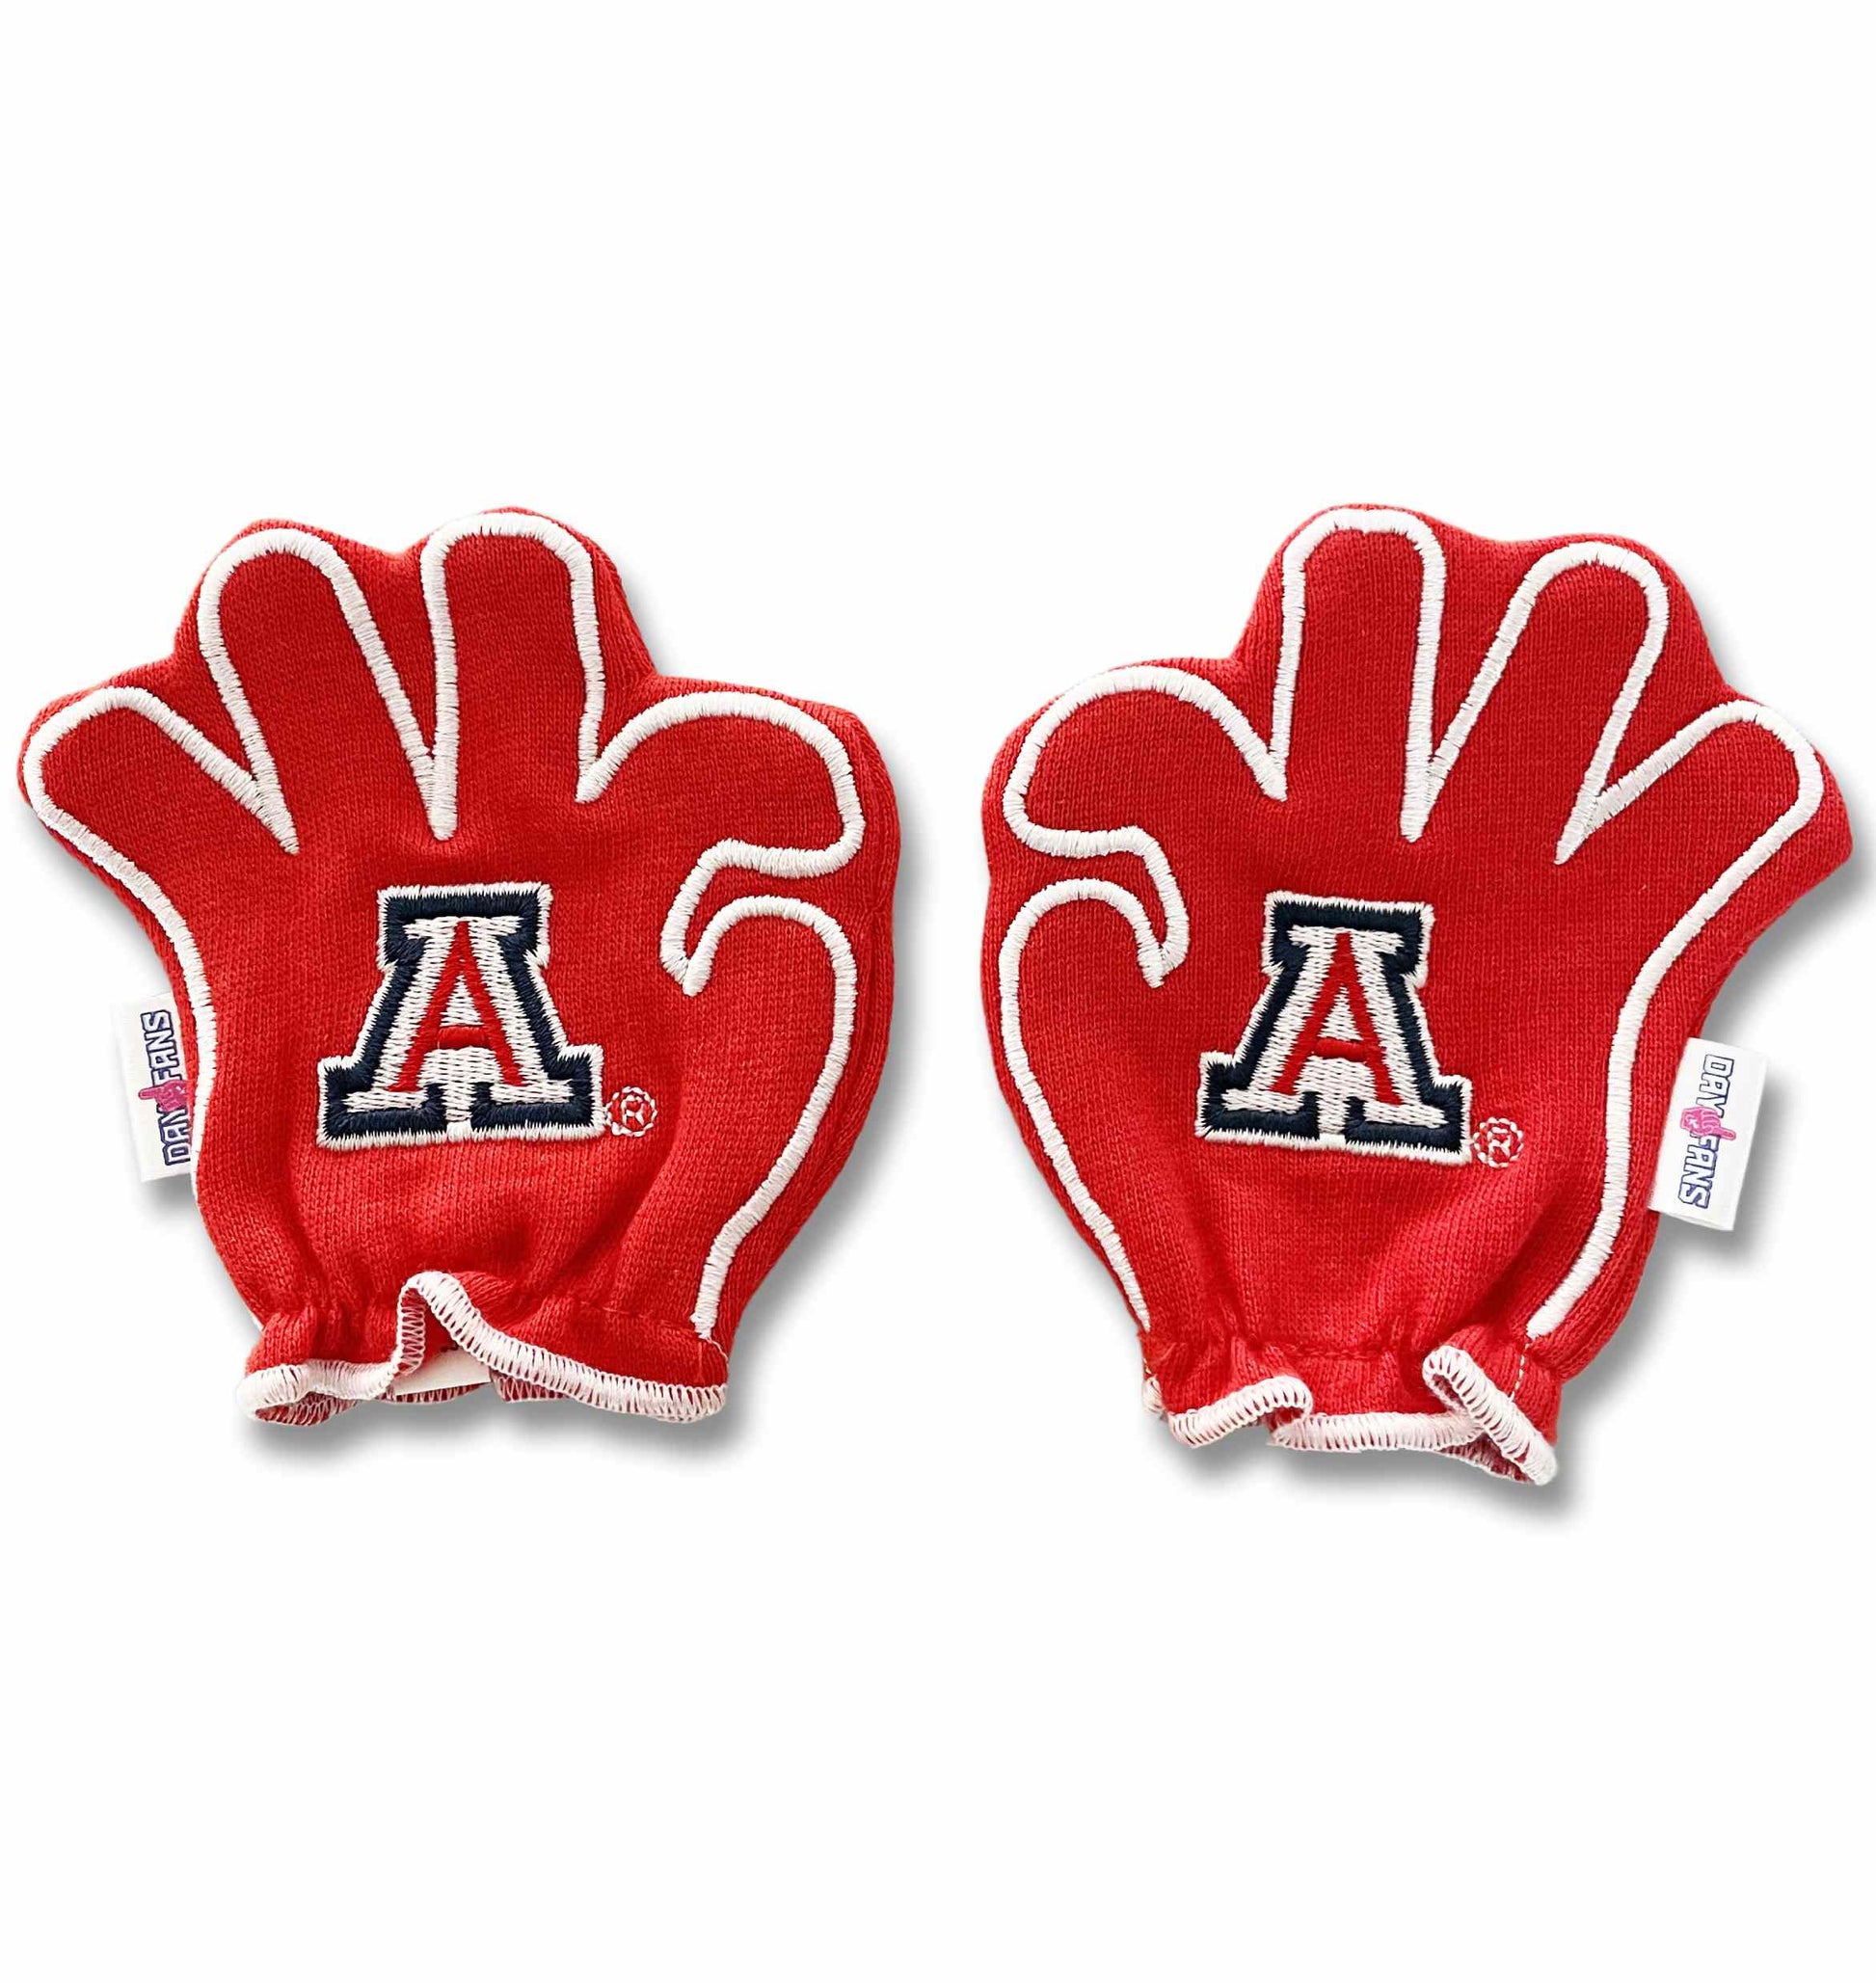 Arizona Bear Down FanMitts Baby Mittens Red Back Pair